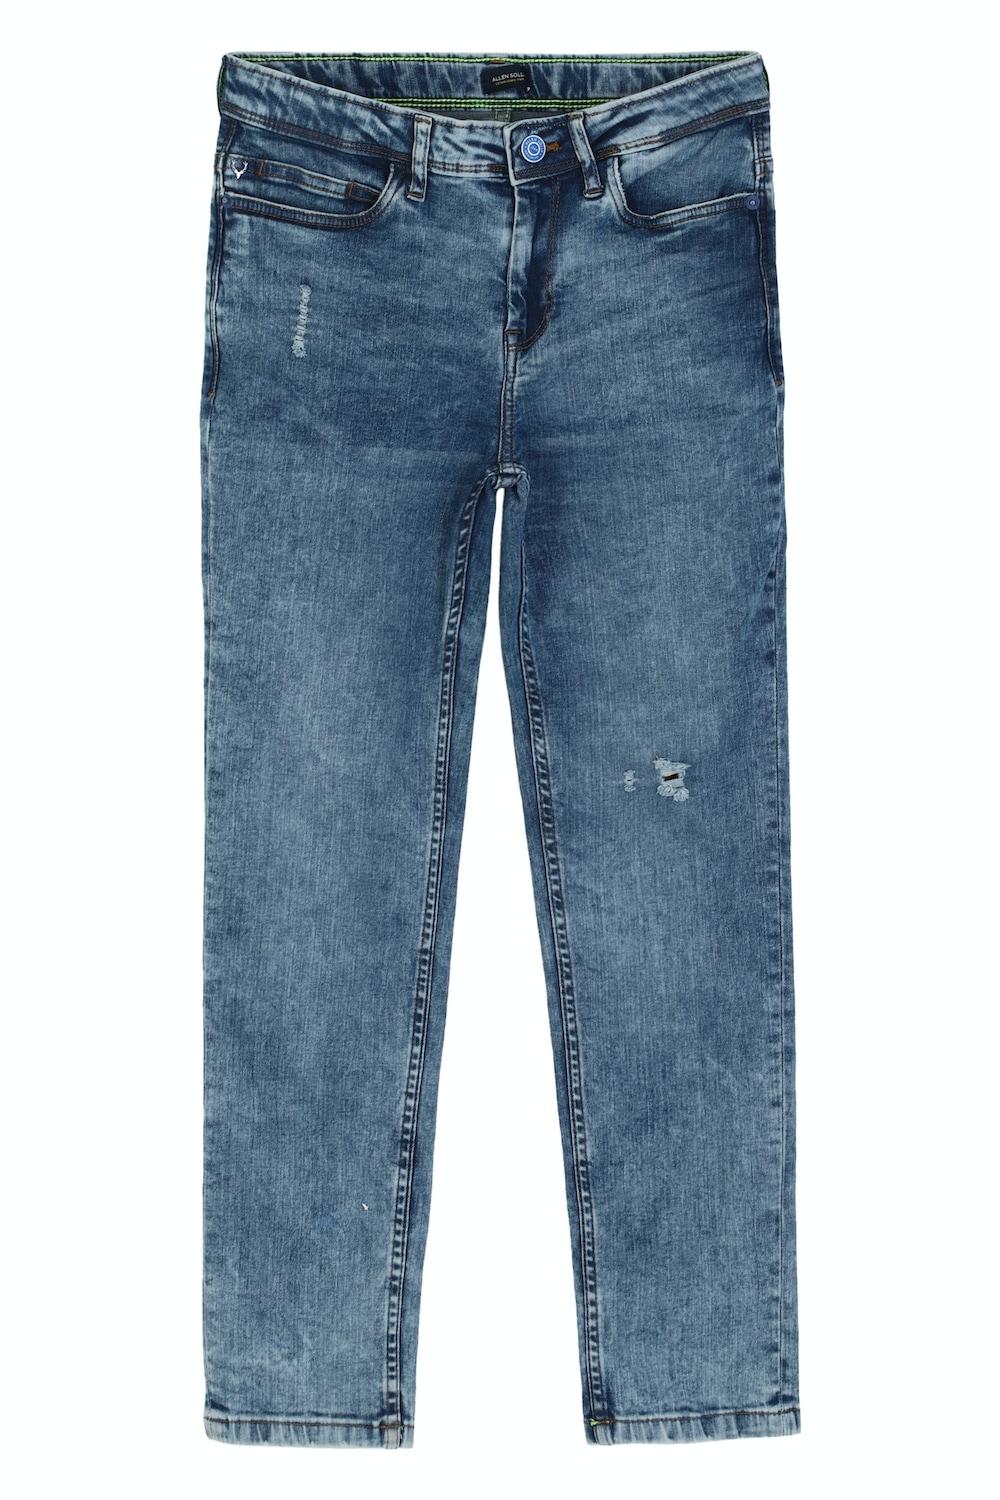 Blue Boys Slim Fit Jeans By Allen Solly